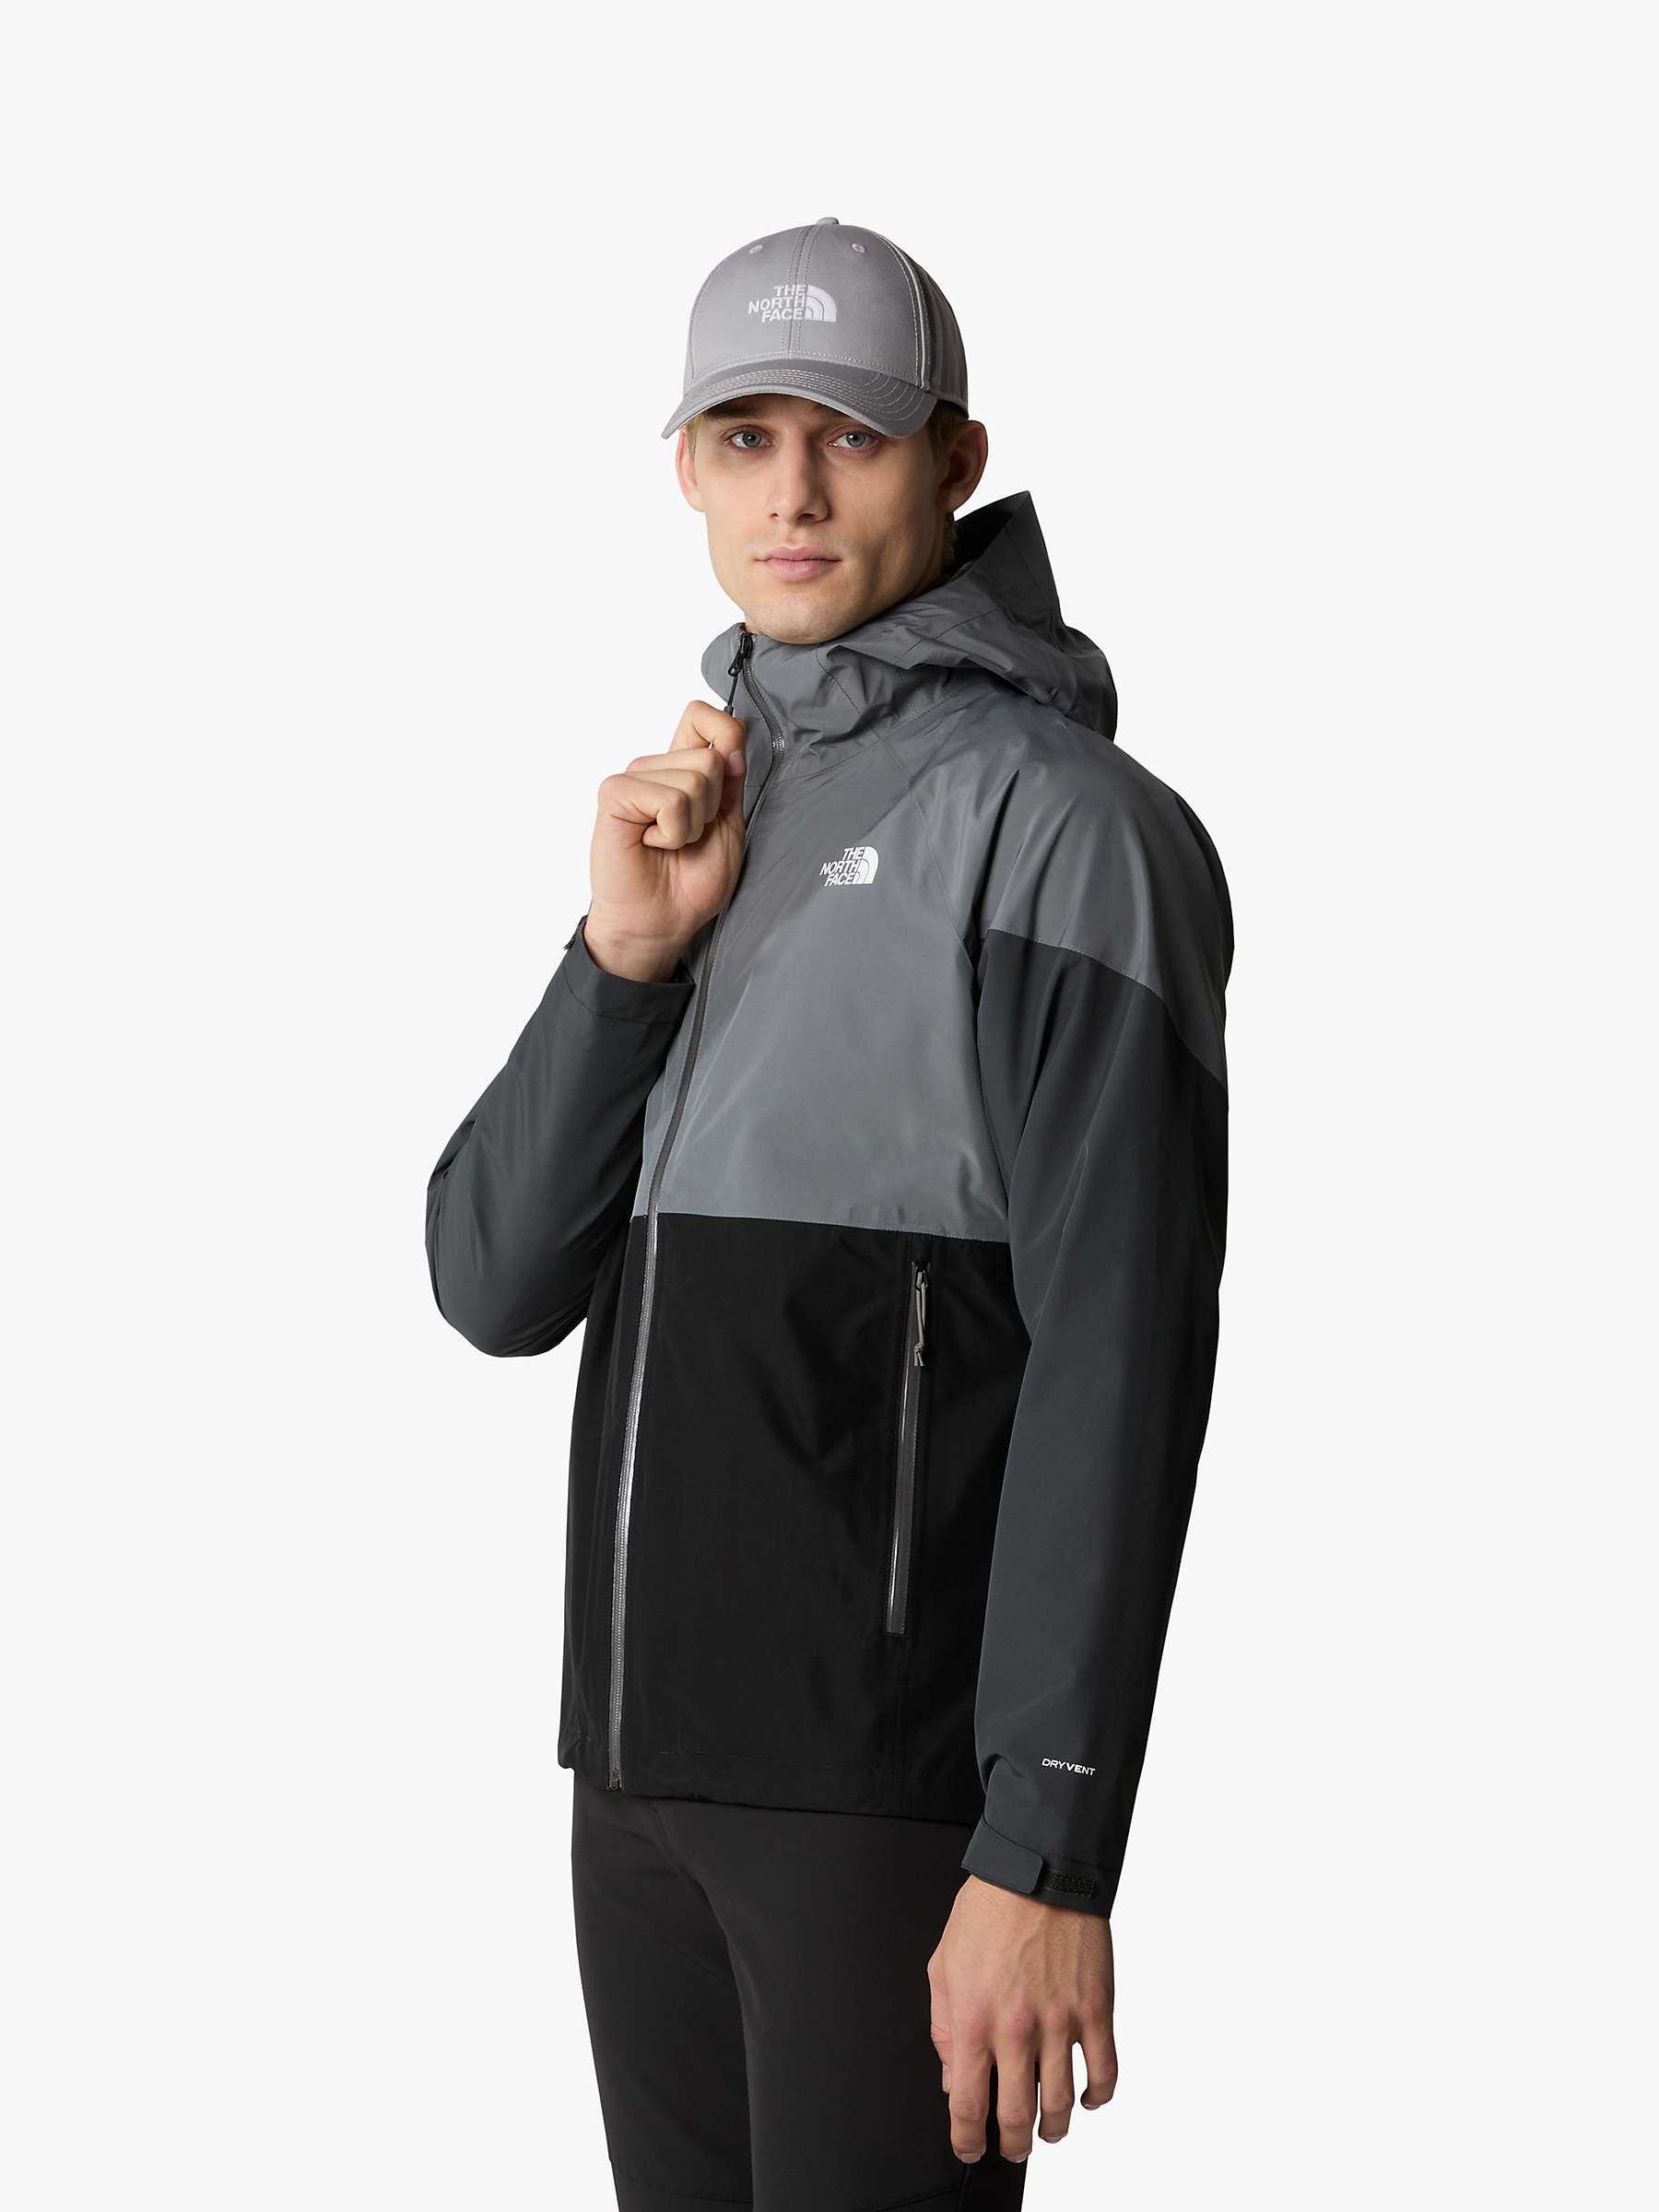 Buy The North Face Lightning Zip-In Jacket, Black/Smoked Pearl Online at johnlewis.com